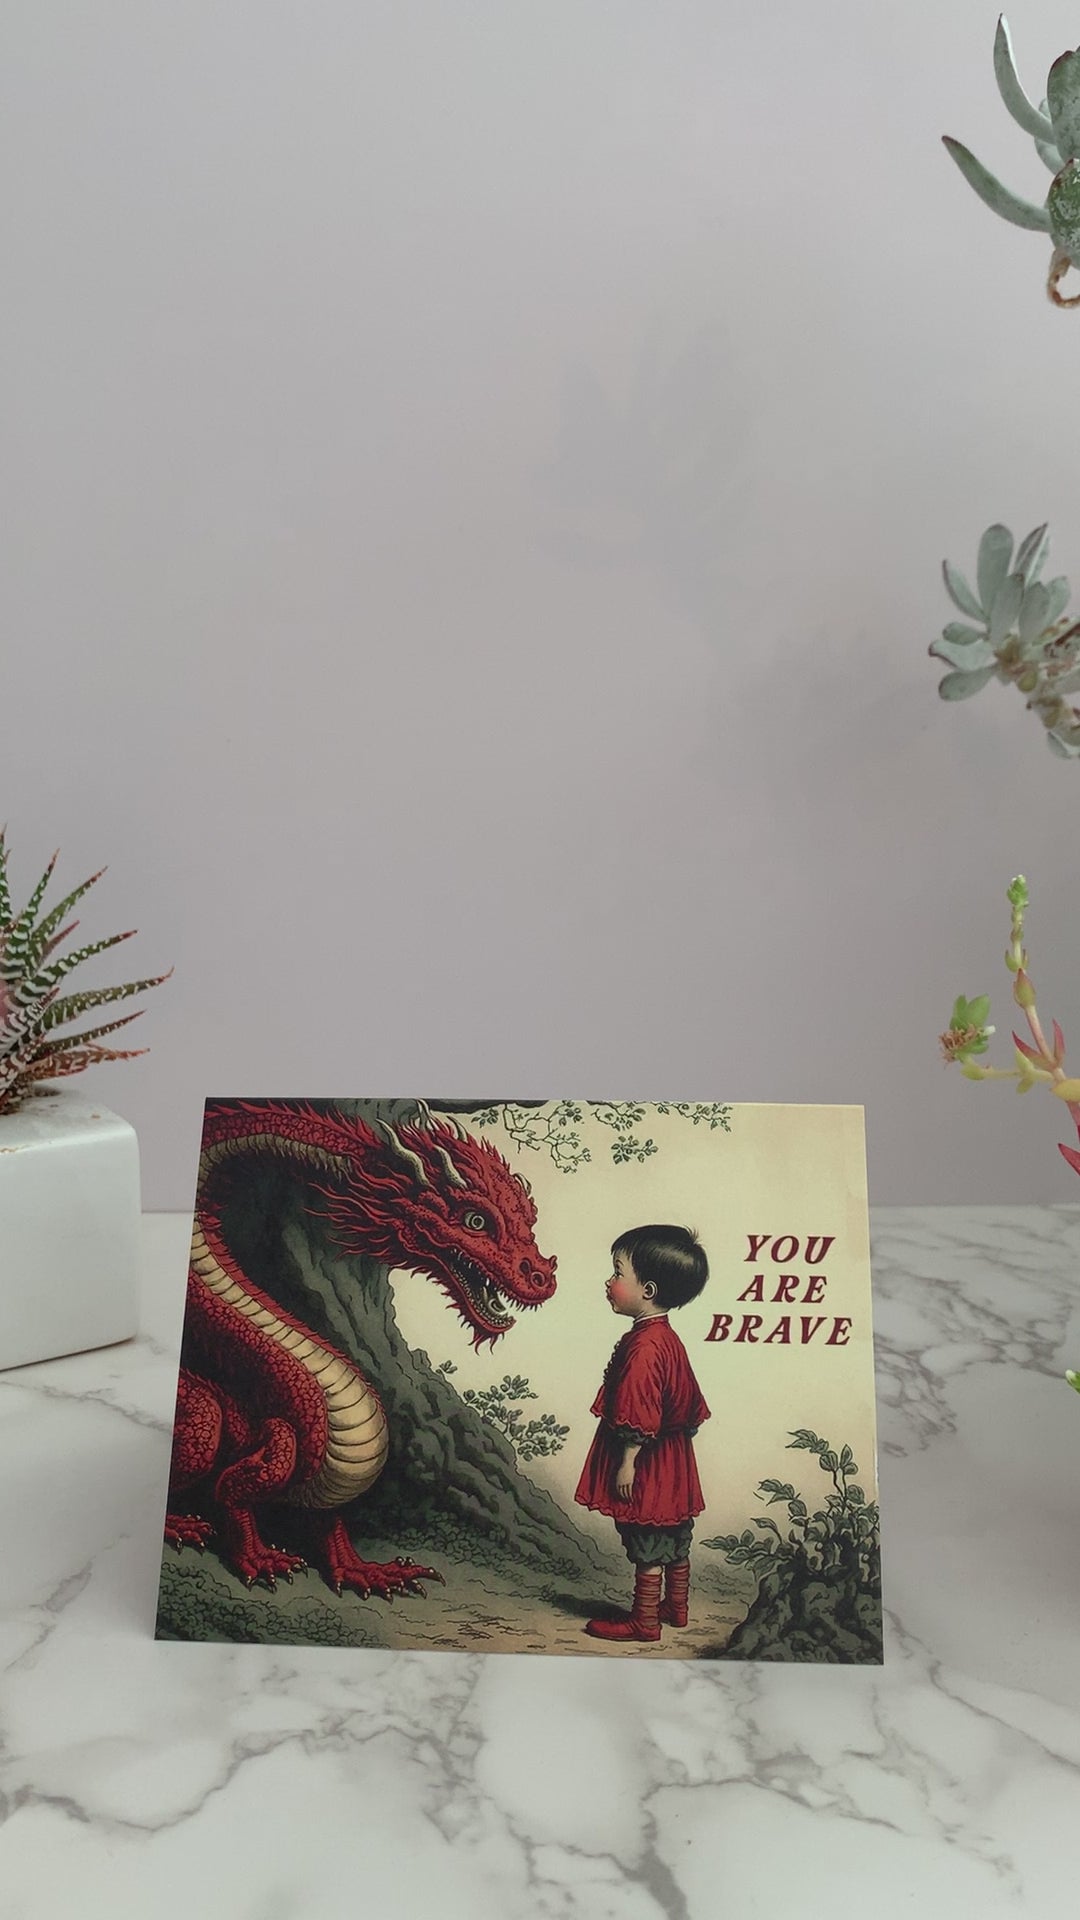 All purpose greeting card that says "You are Brave" on the front. Vintage images featuring a little boy calmly  staring into the face of a large red dragon, next to a tree. Color pallet is reds, yellows, and greens. Blank inside. Perfect to send to a friend who is going through a big life change.